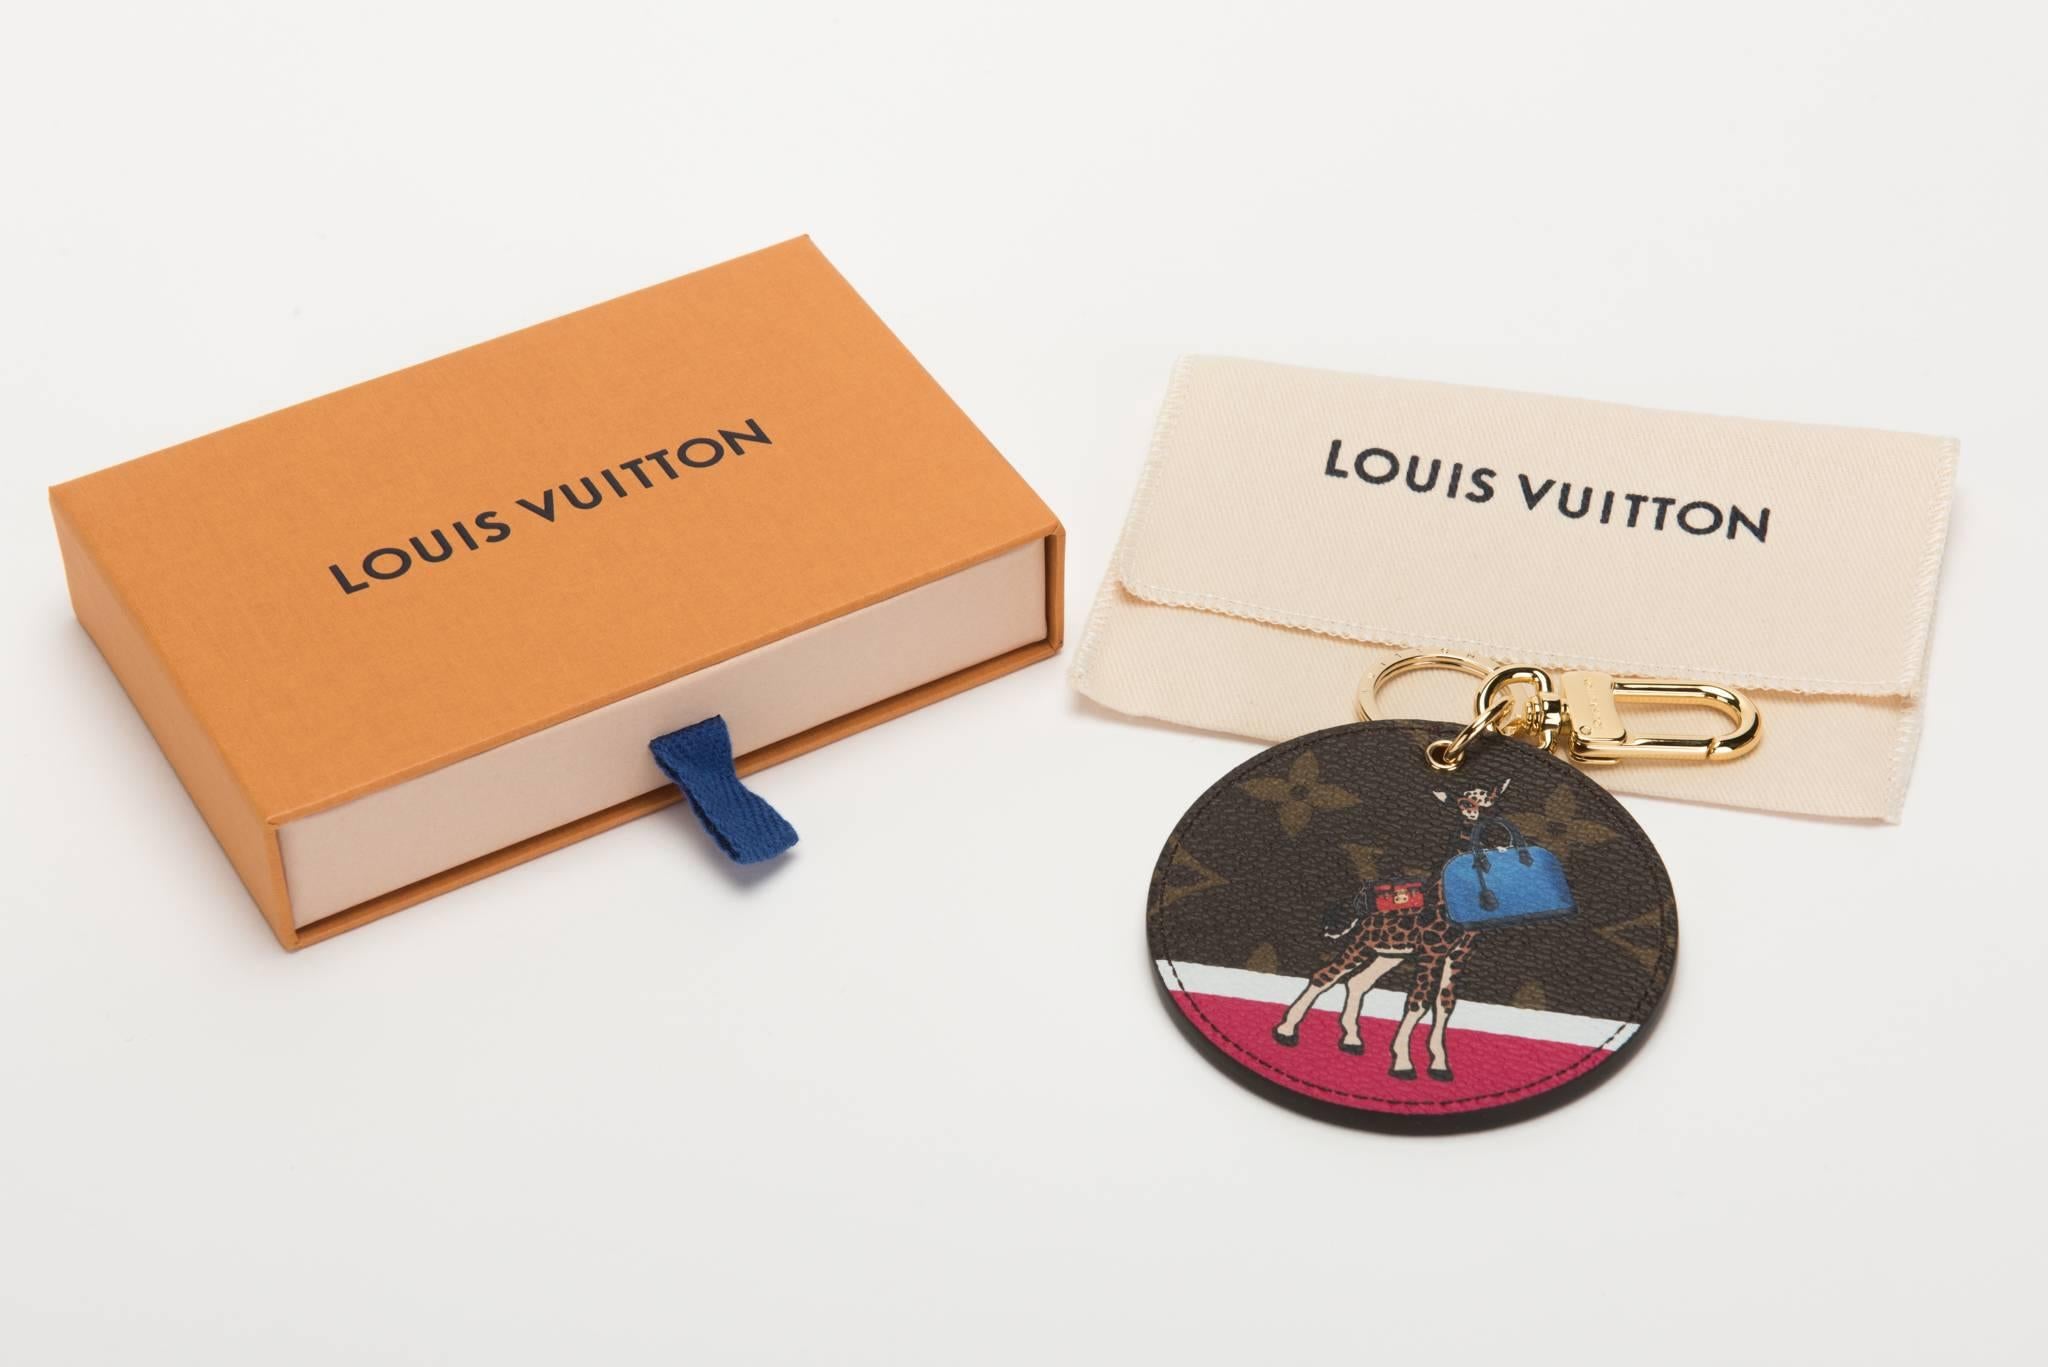 Louis Vuitton sold out giraffe Christmas collection keychain, bag charm . Comes with original dust cover and box.